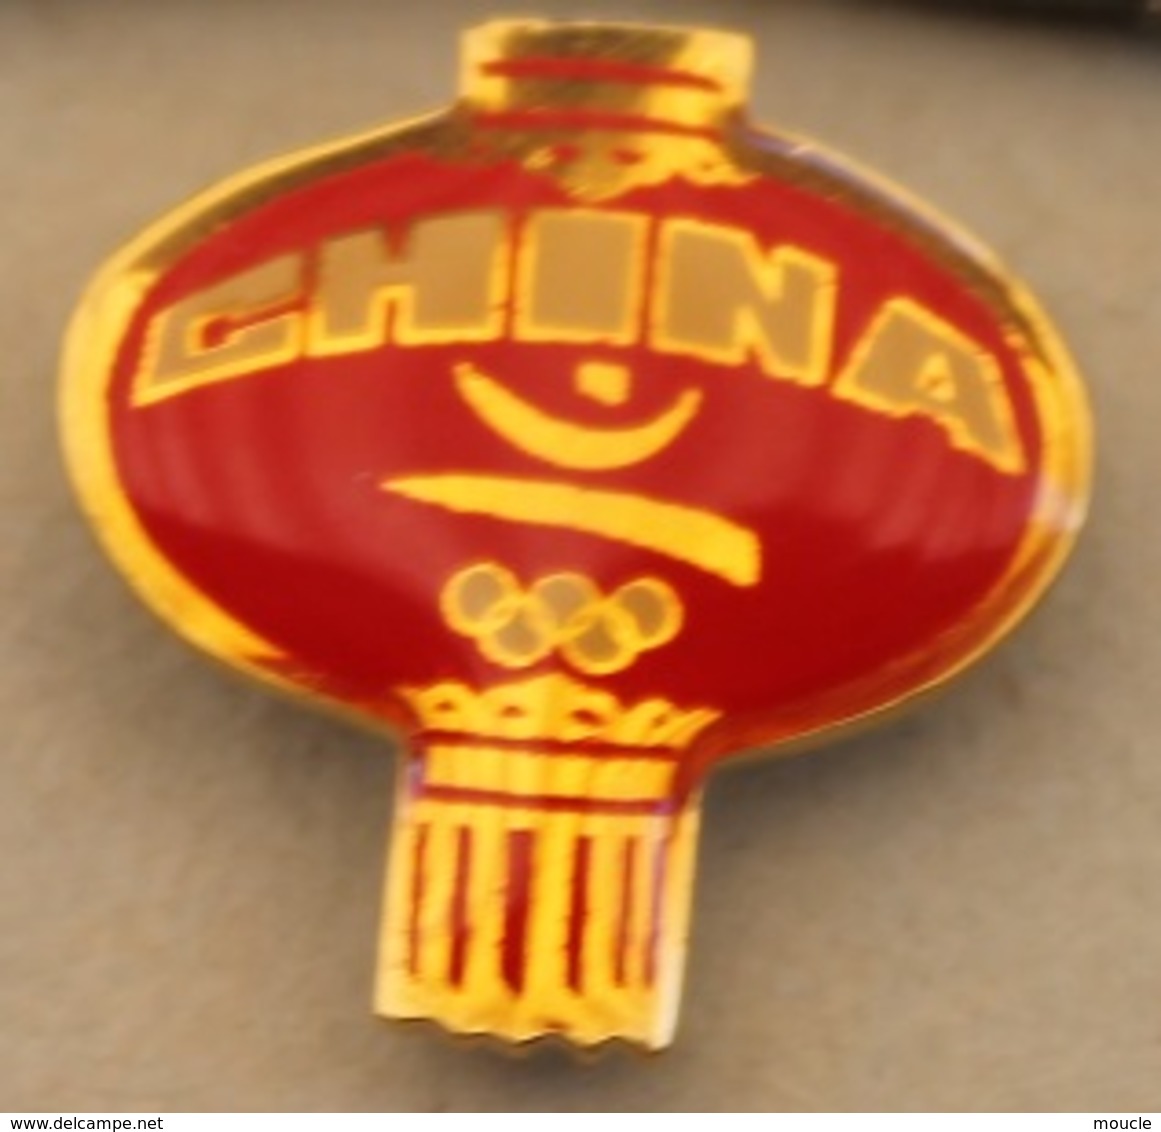 JEUX OLYMPIQUES  - TEAM CHINA - EQUIPE DE CHINE - COMITE OLYMPIQUE - BARCELONA 92   -      (20) - Jeux Olympiques